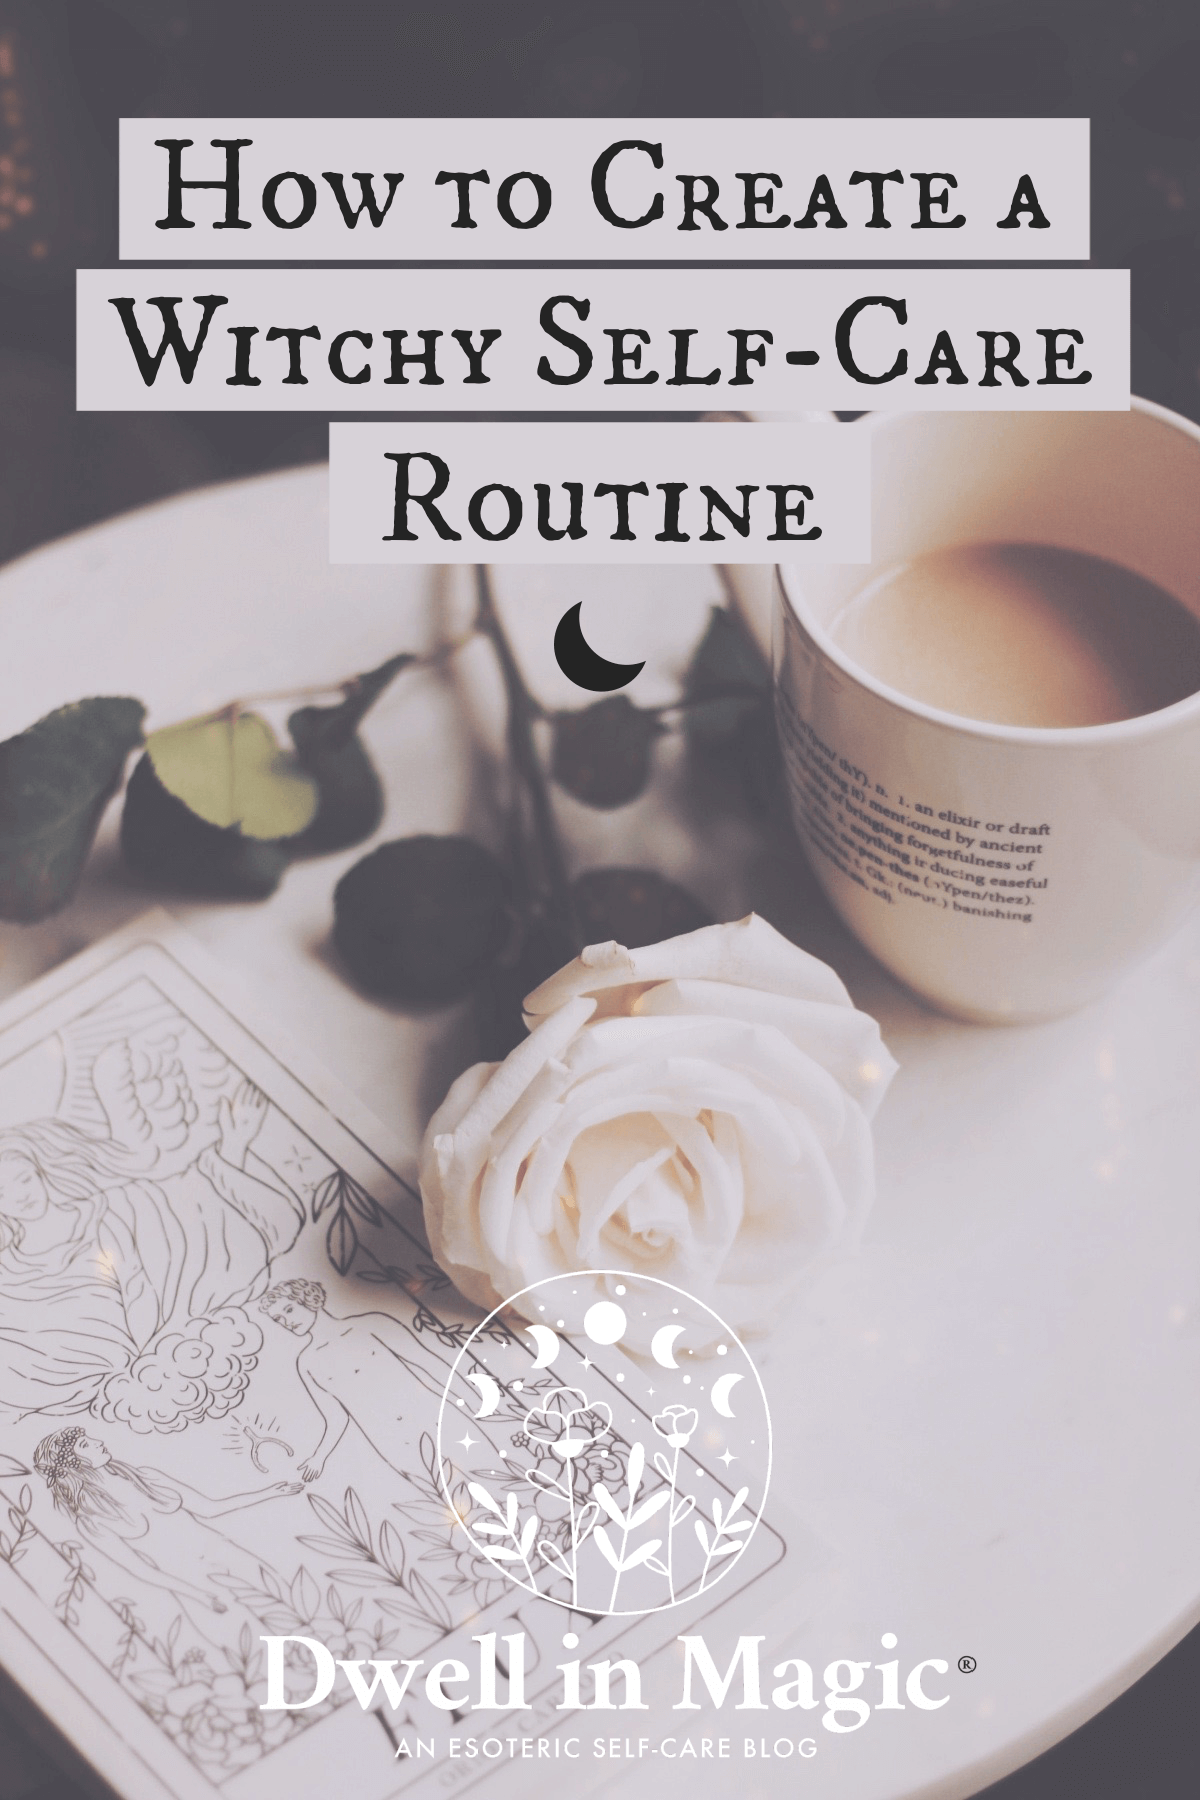 Creating a Witchy Self-Care Routine